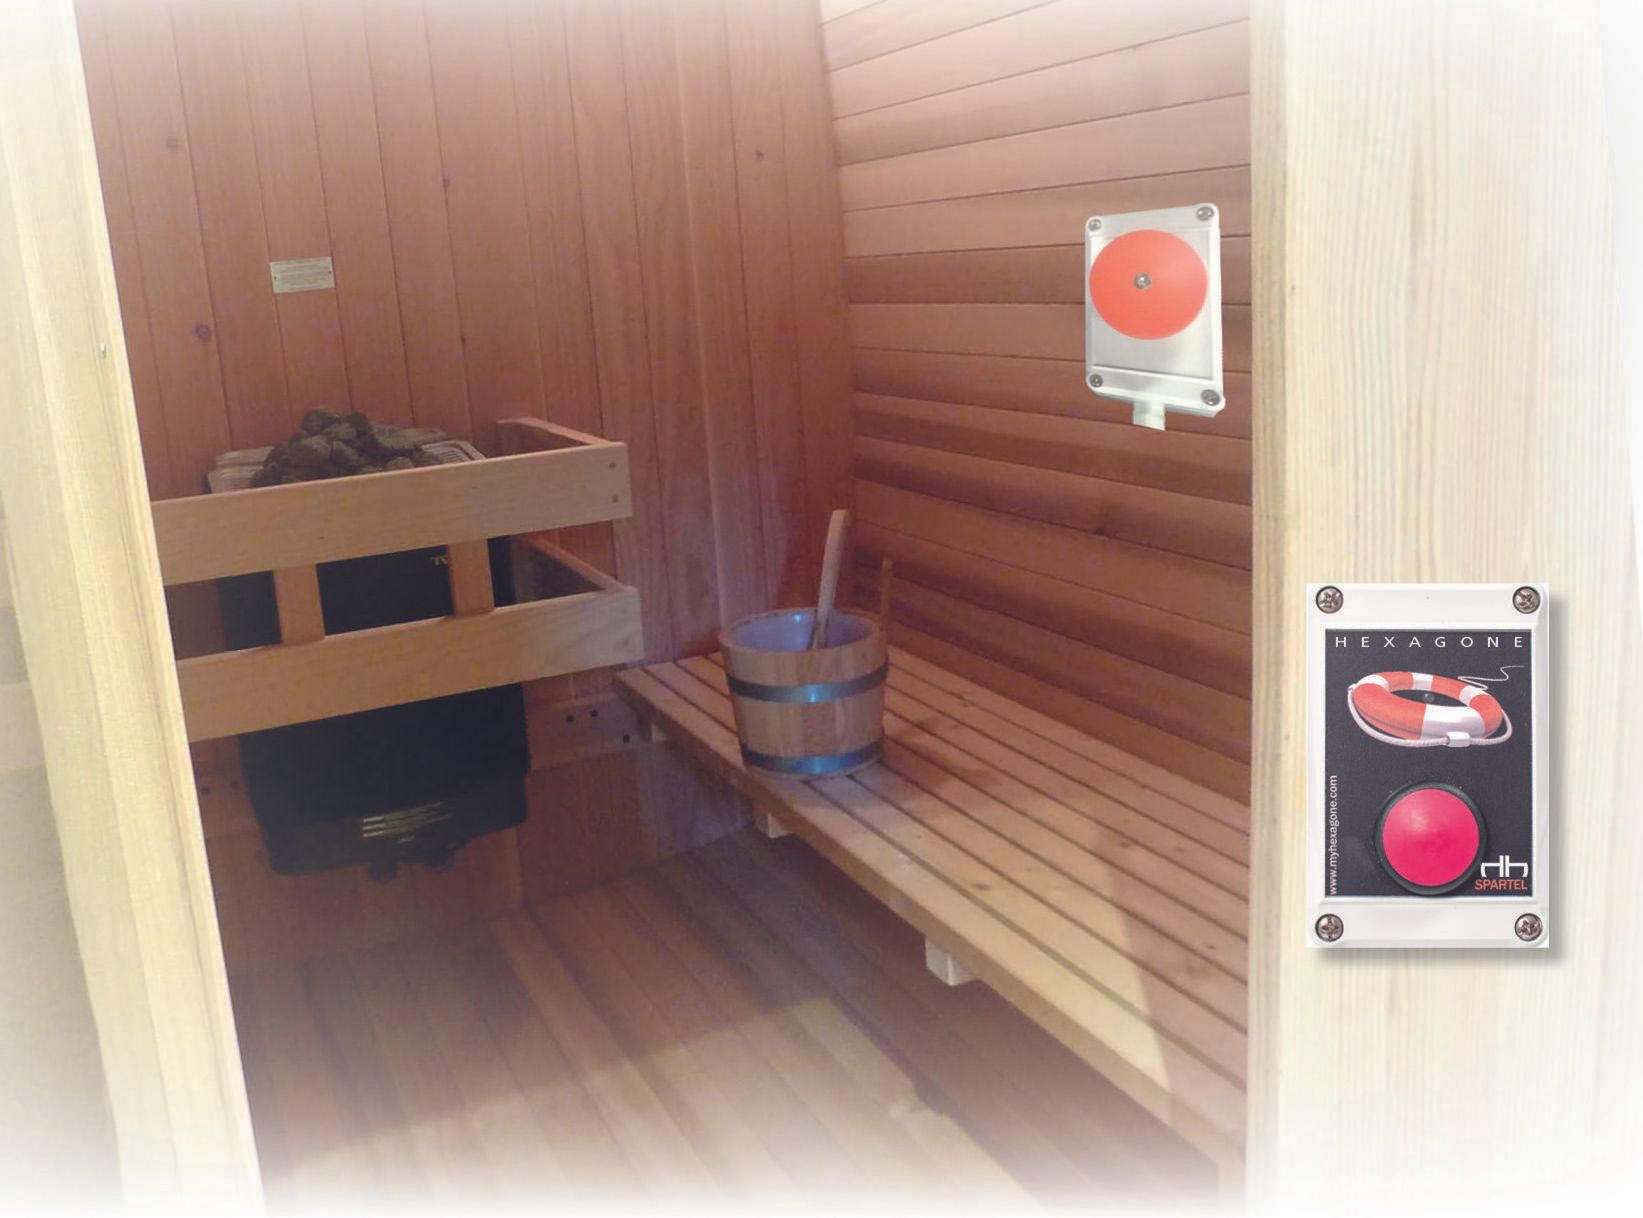 NEW ALERT SYSTEM SPARTEL ENSURES THE SAFETY OF SAUNA USERS